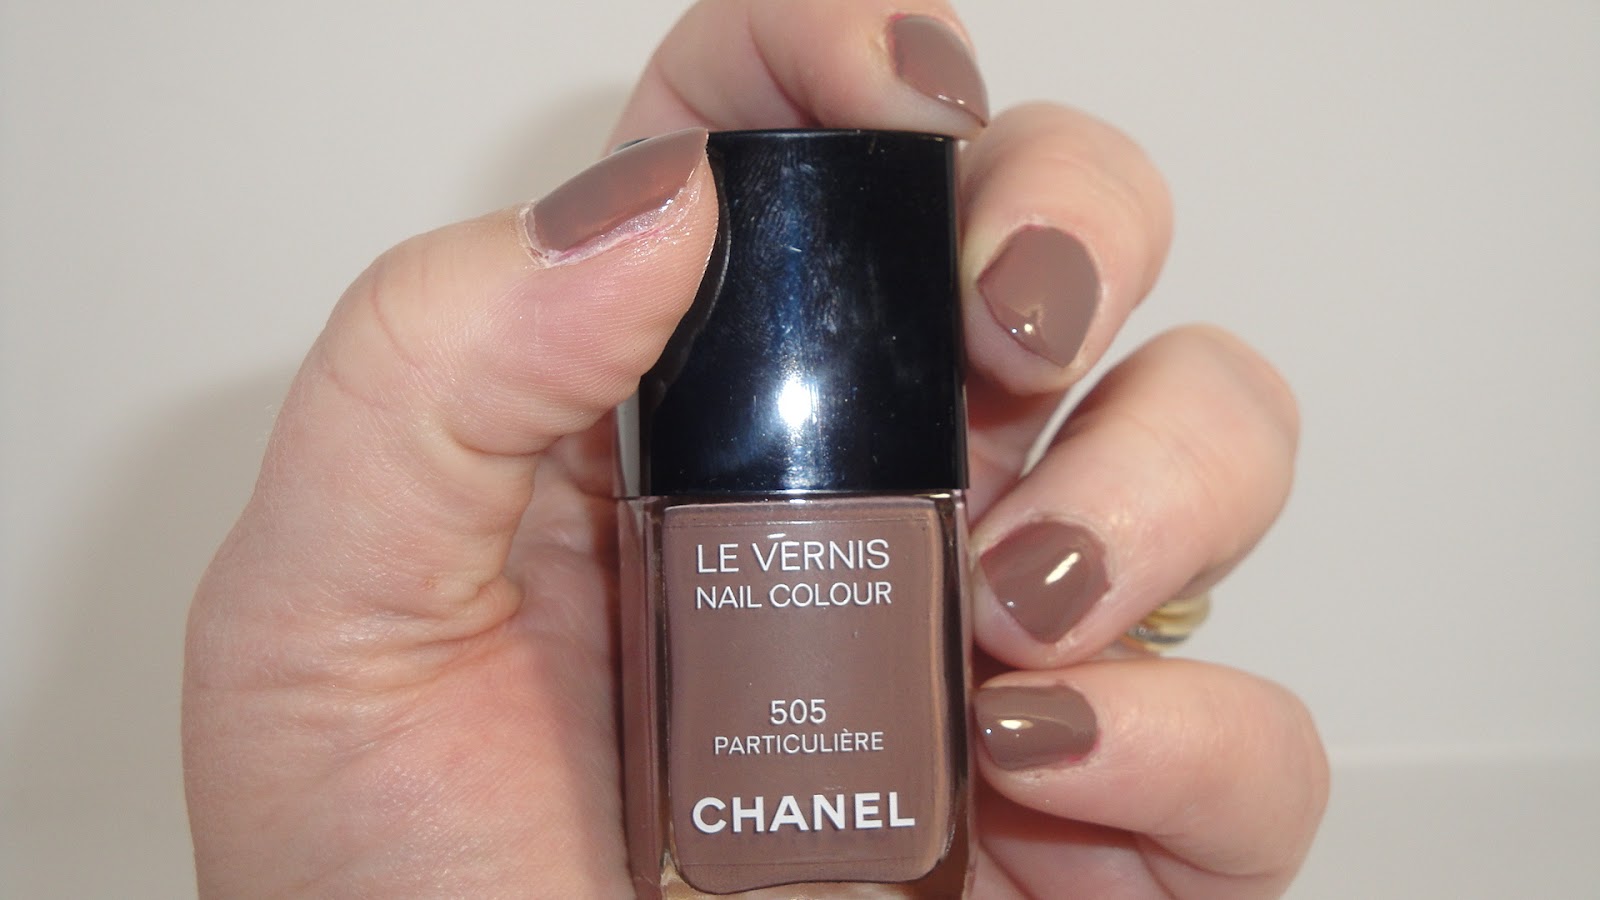 Chanel Le Vernis Longwear Nail Colour in Particuliere - wide 1